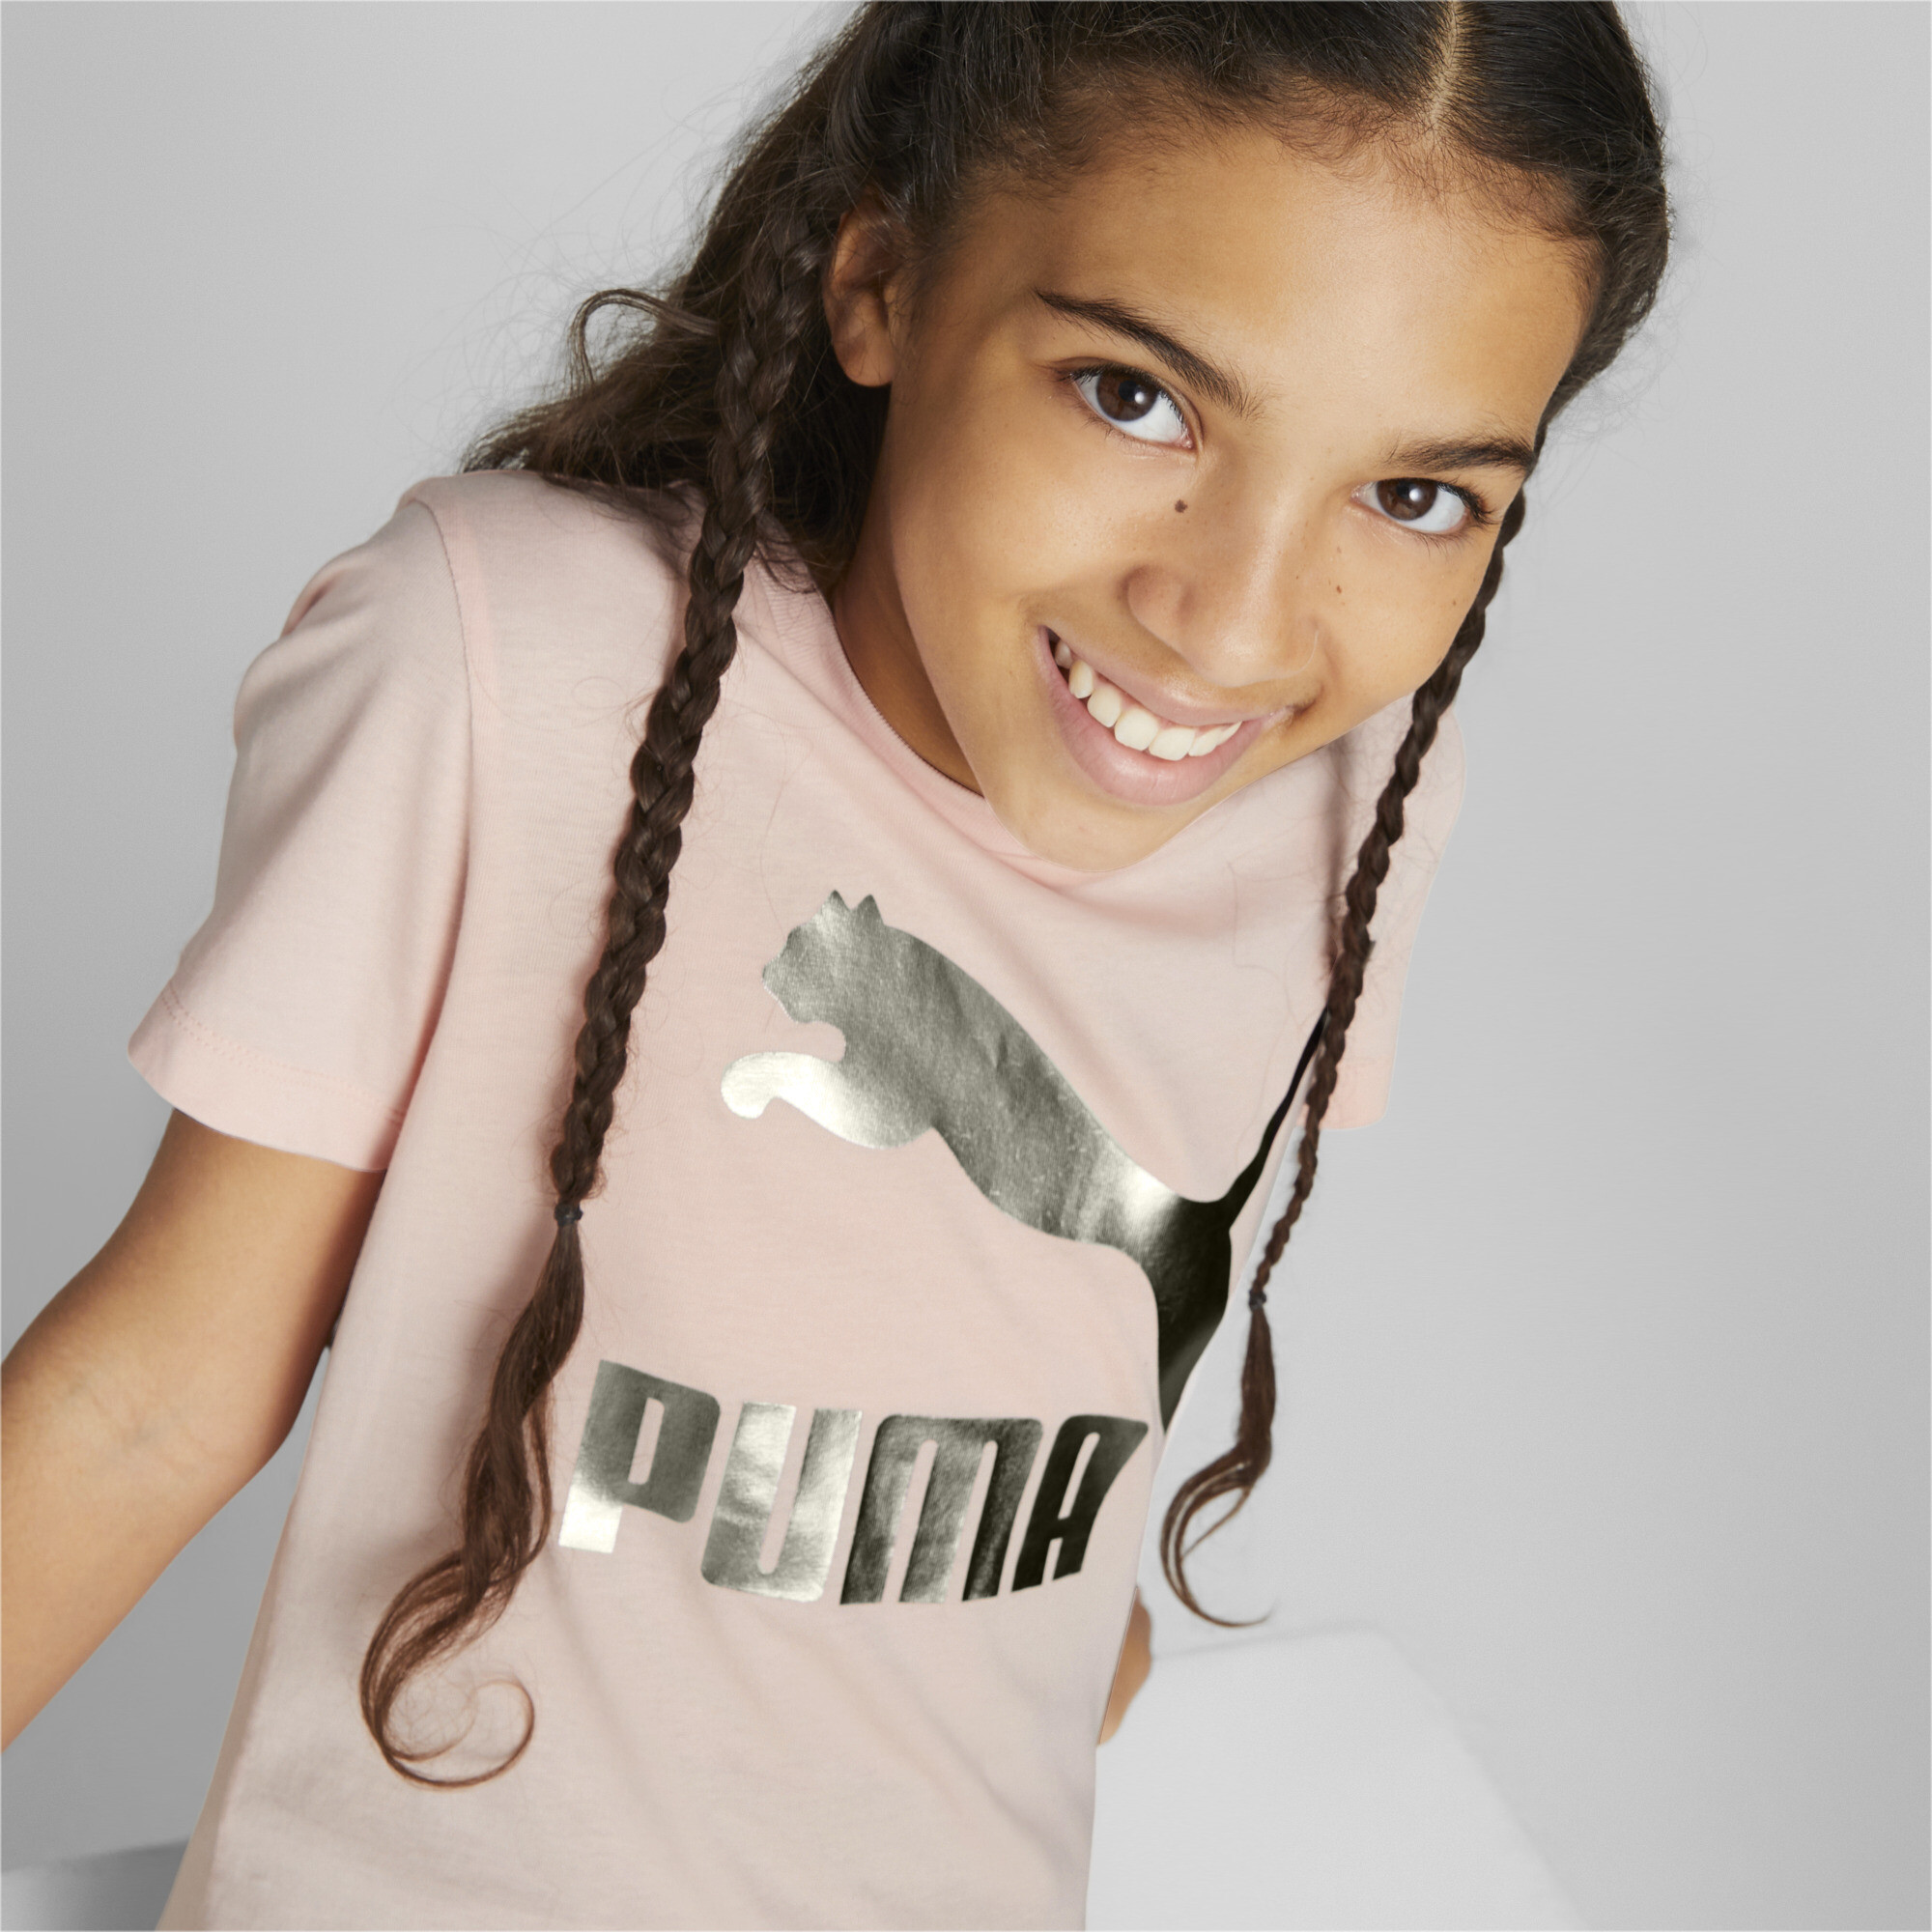 PUMA Classics Logo T-Shirt In Pink, Size 15-16 Youth